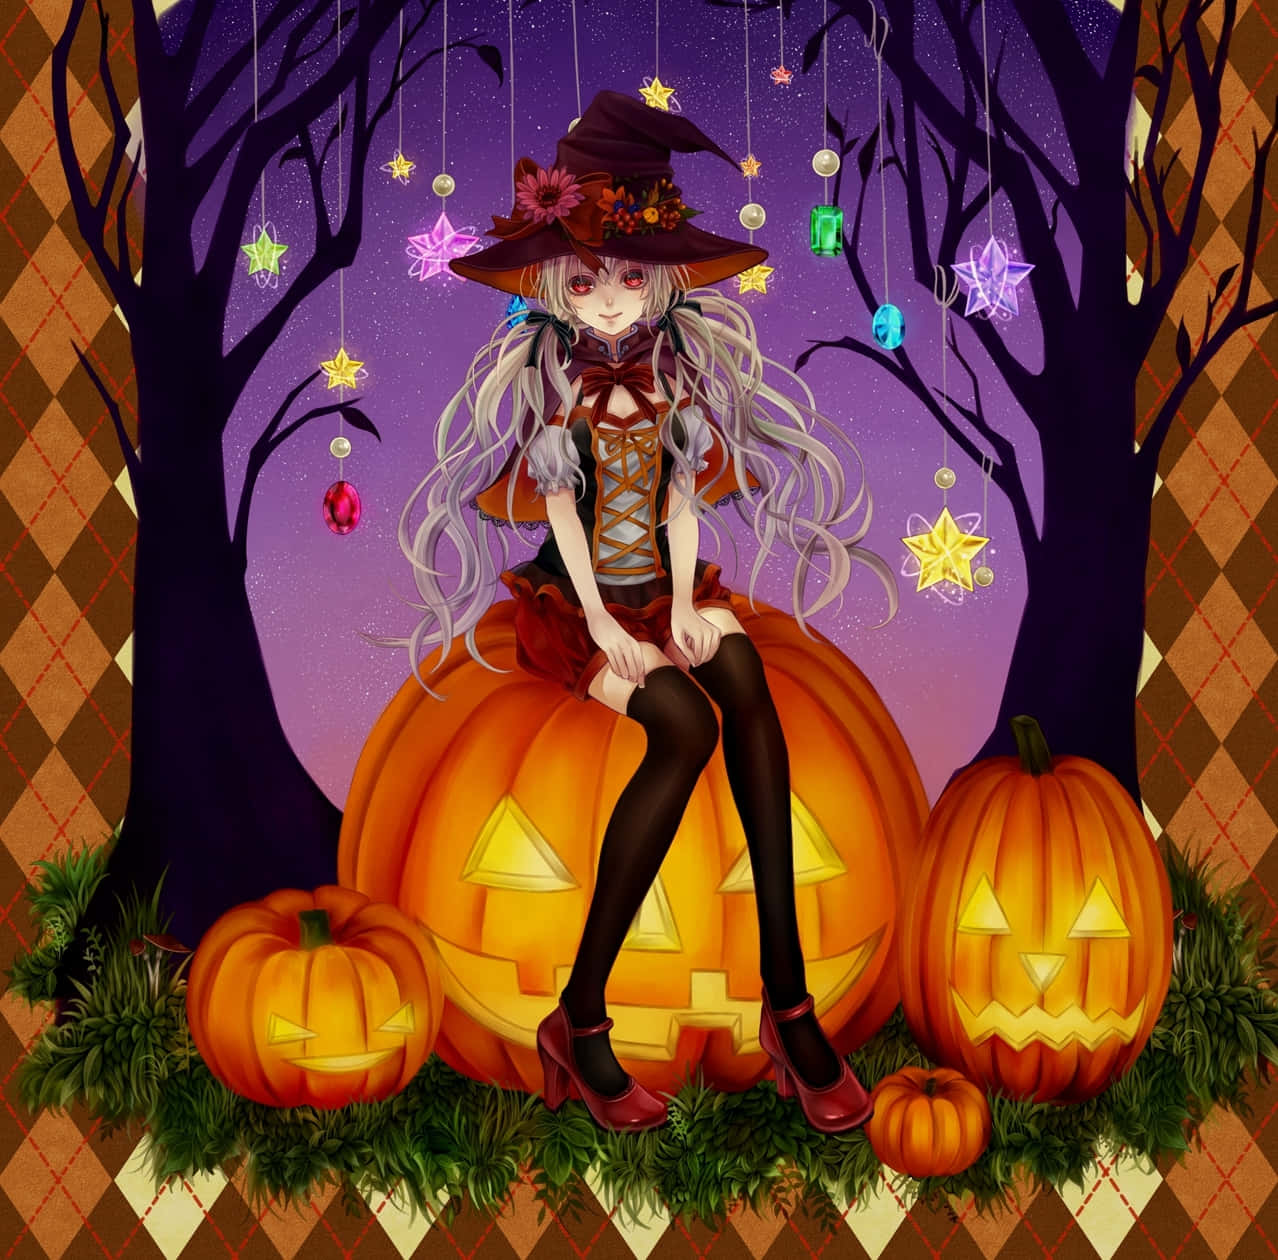 A Girl Sitting On Pumpkins In A Halloween Costume